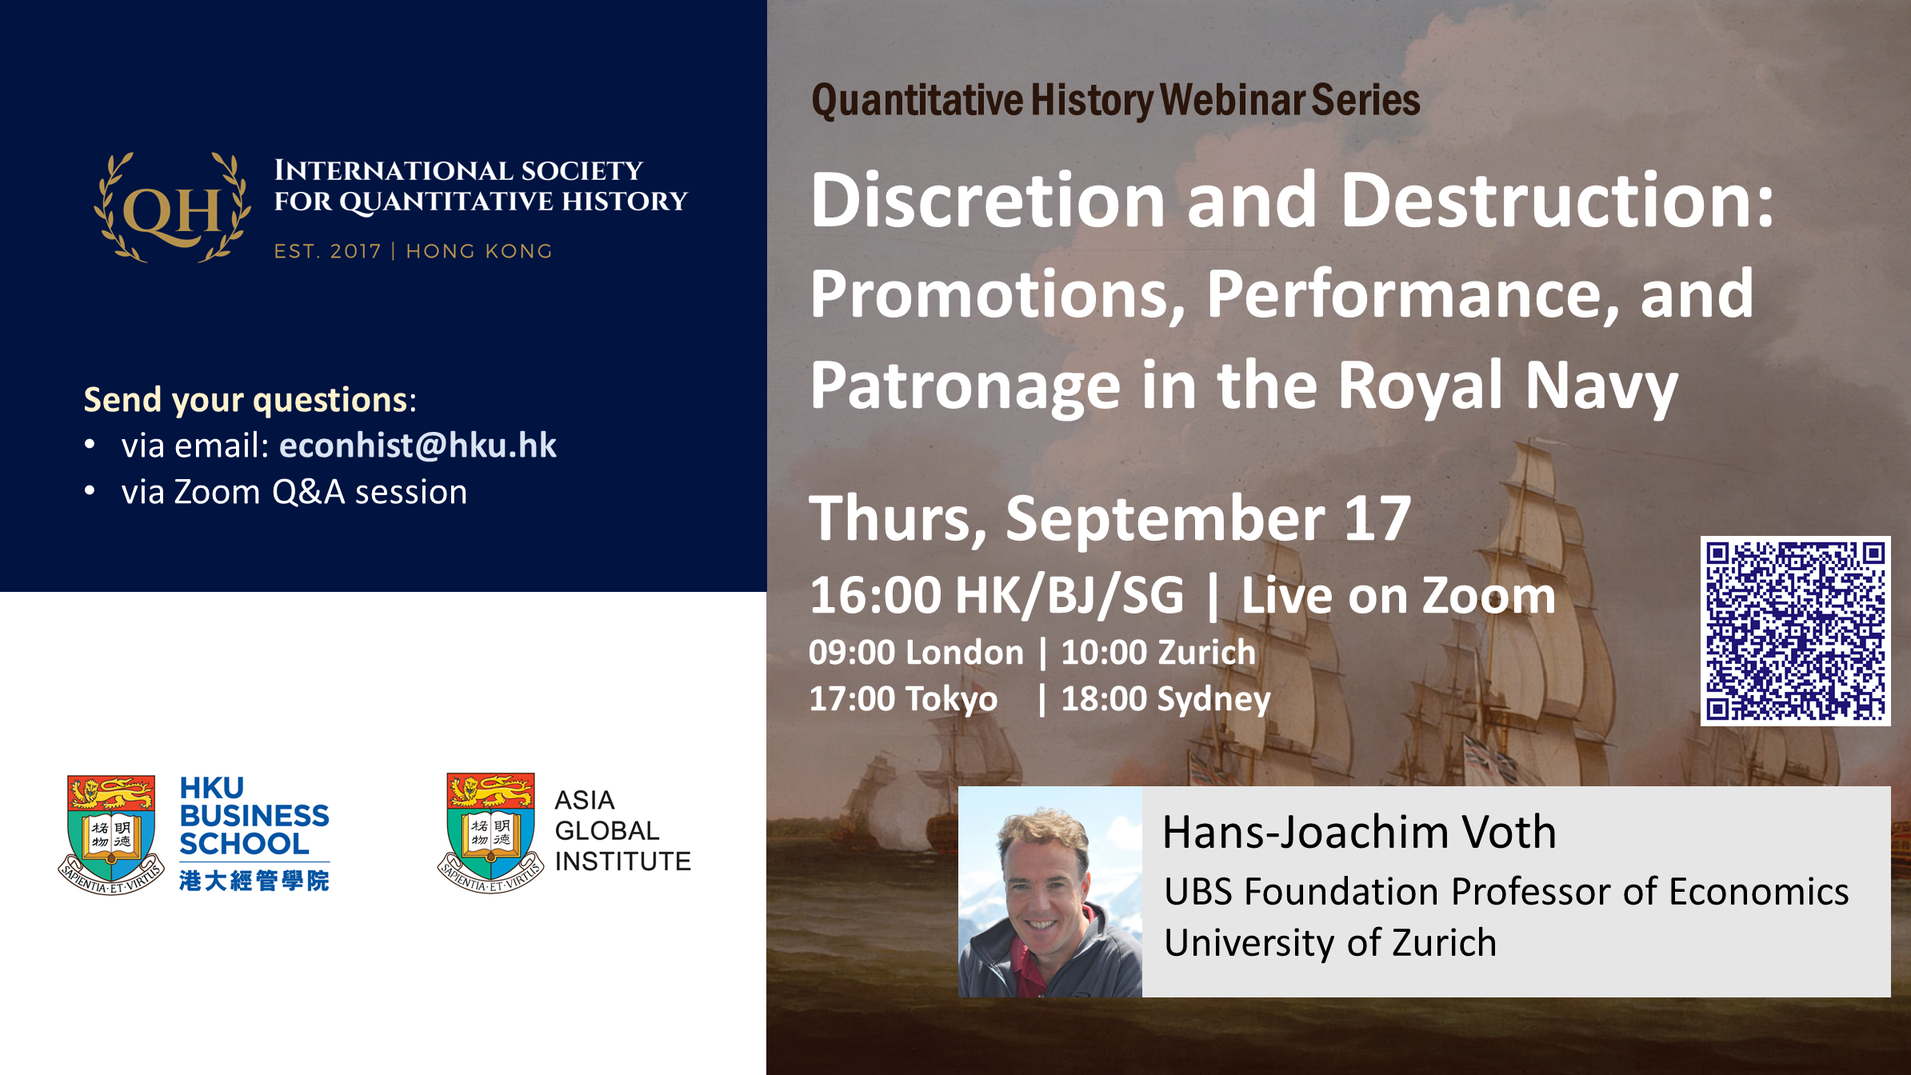 Quantitative History Webinar Series - Discretion and Destruction: Promotions, Performance, and Patronage in the Royal Navy